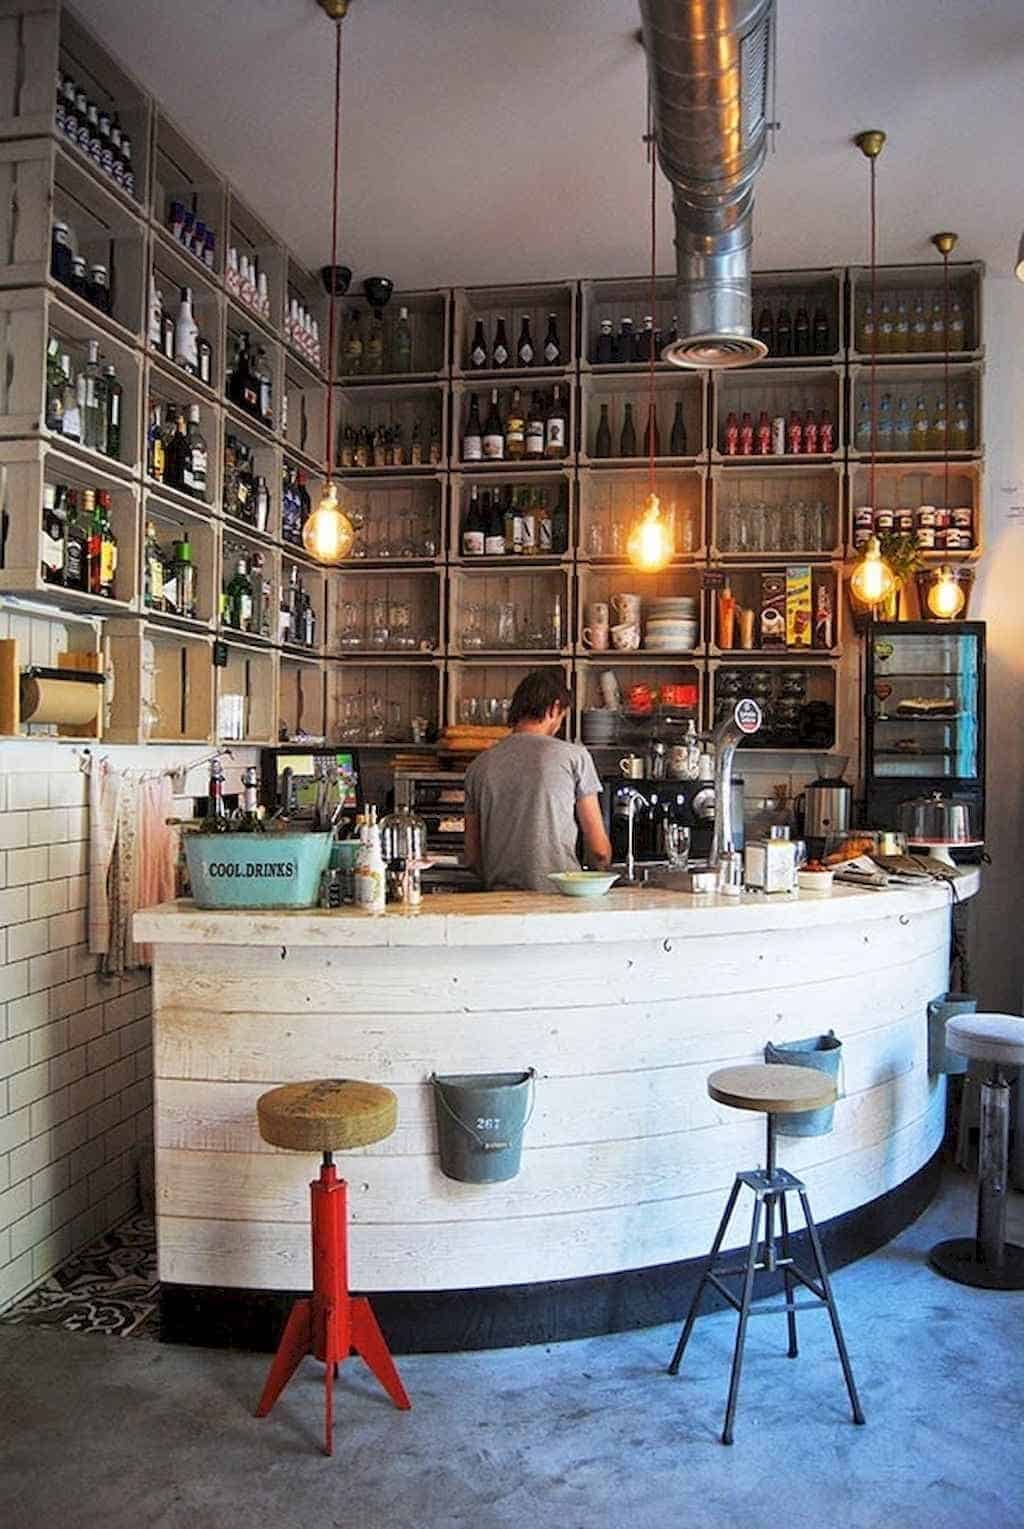 Best Kitchen Coffee Bar With Wall-Mounted Shelves